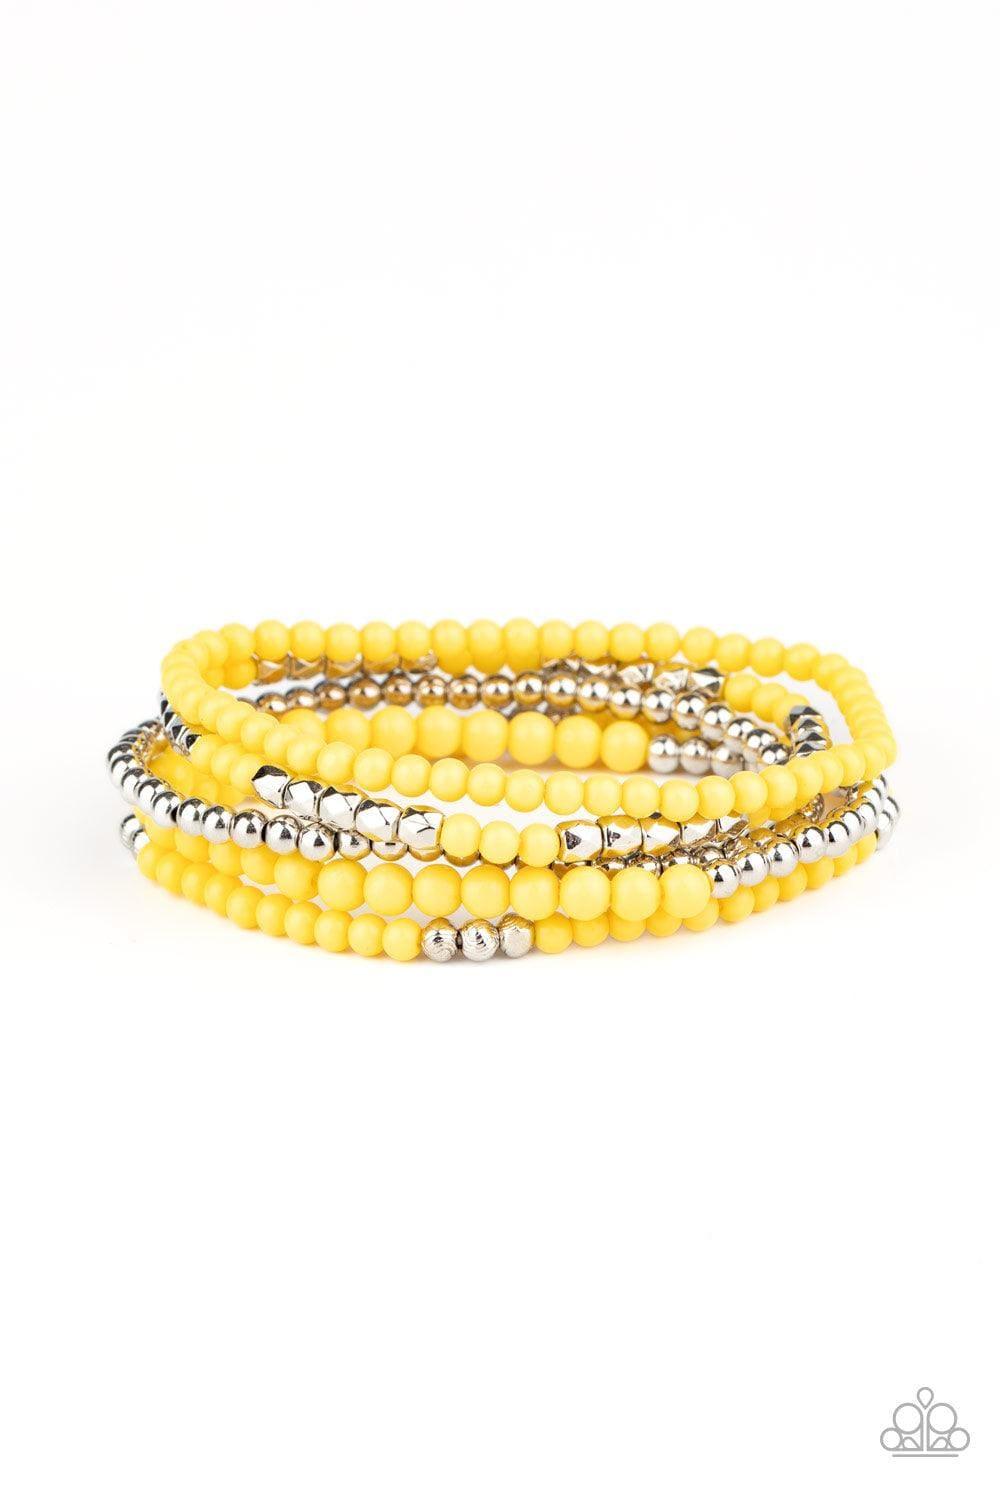 Paparazzi Accessories - Stacked Showcase - Yellow Bracelets - Bling by JessieK